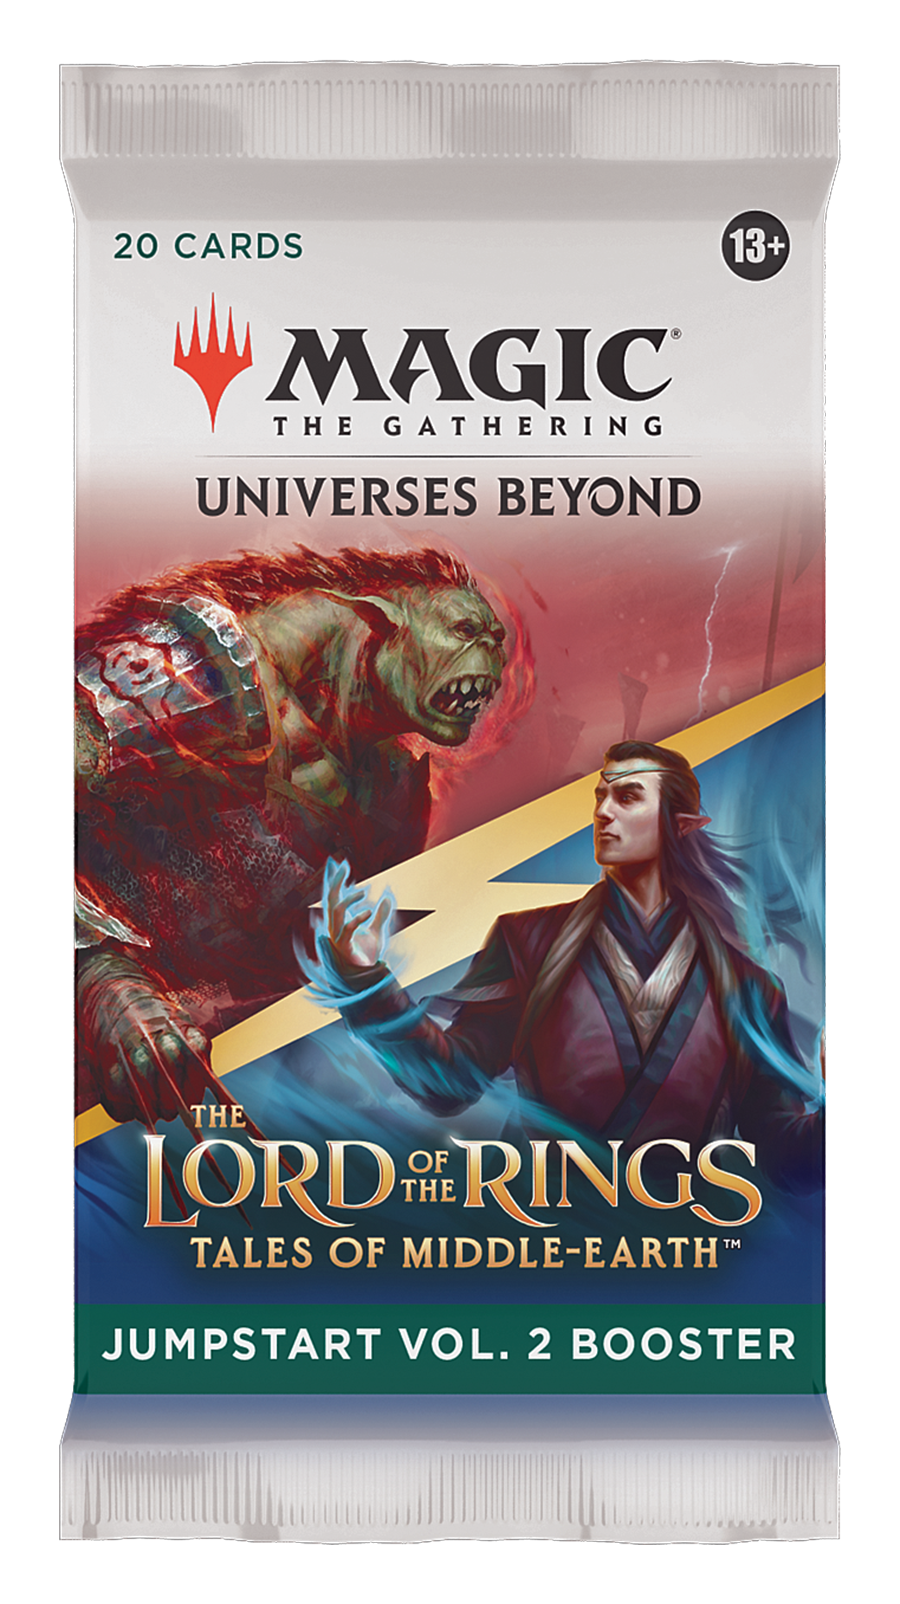 Magic MTG - The Lord of the Rings: Tales of Middle-Earth (Jumpstart Vol. 2 Booster)